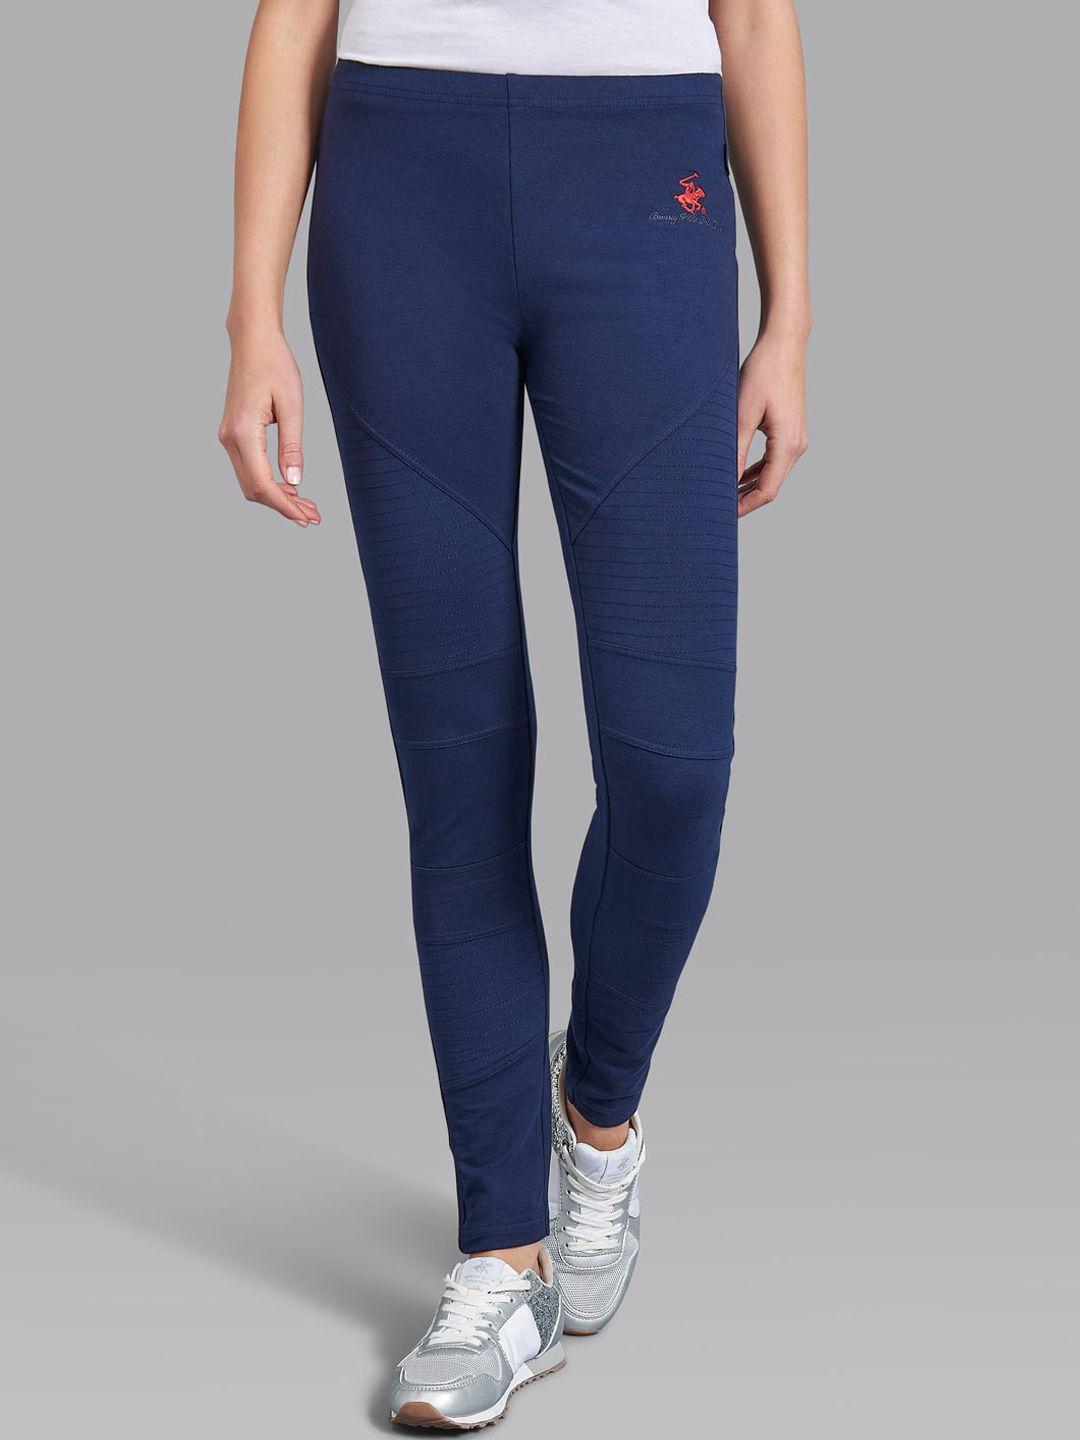 beverly-hills-polo-club-women-navy-blue-solid-leggings